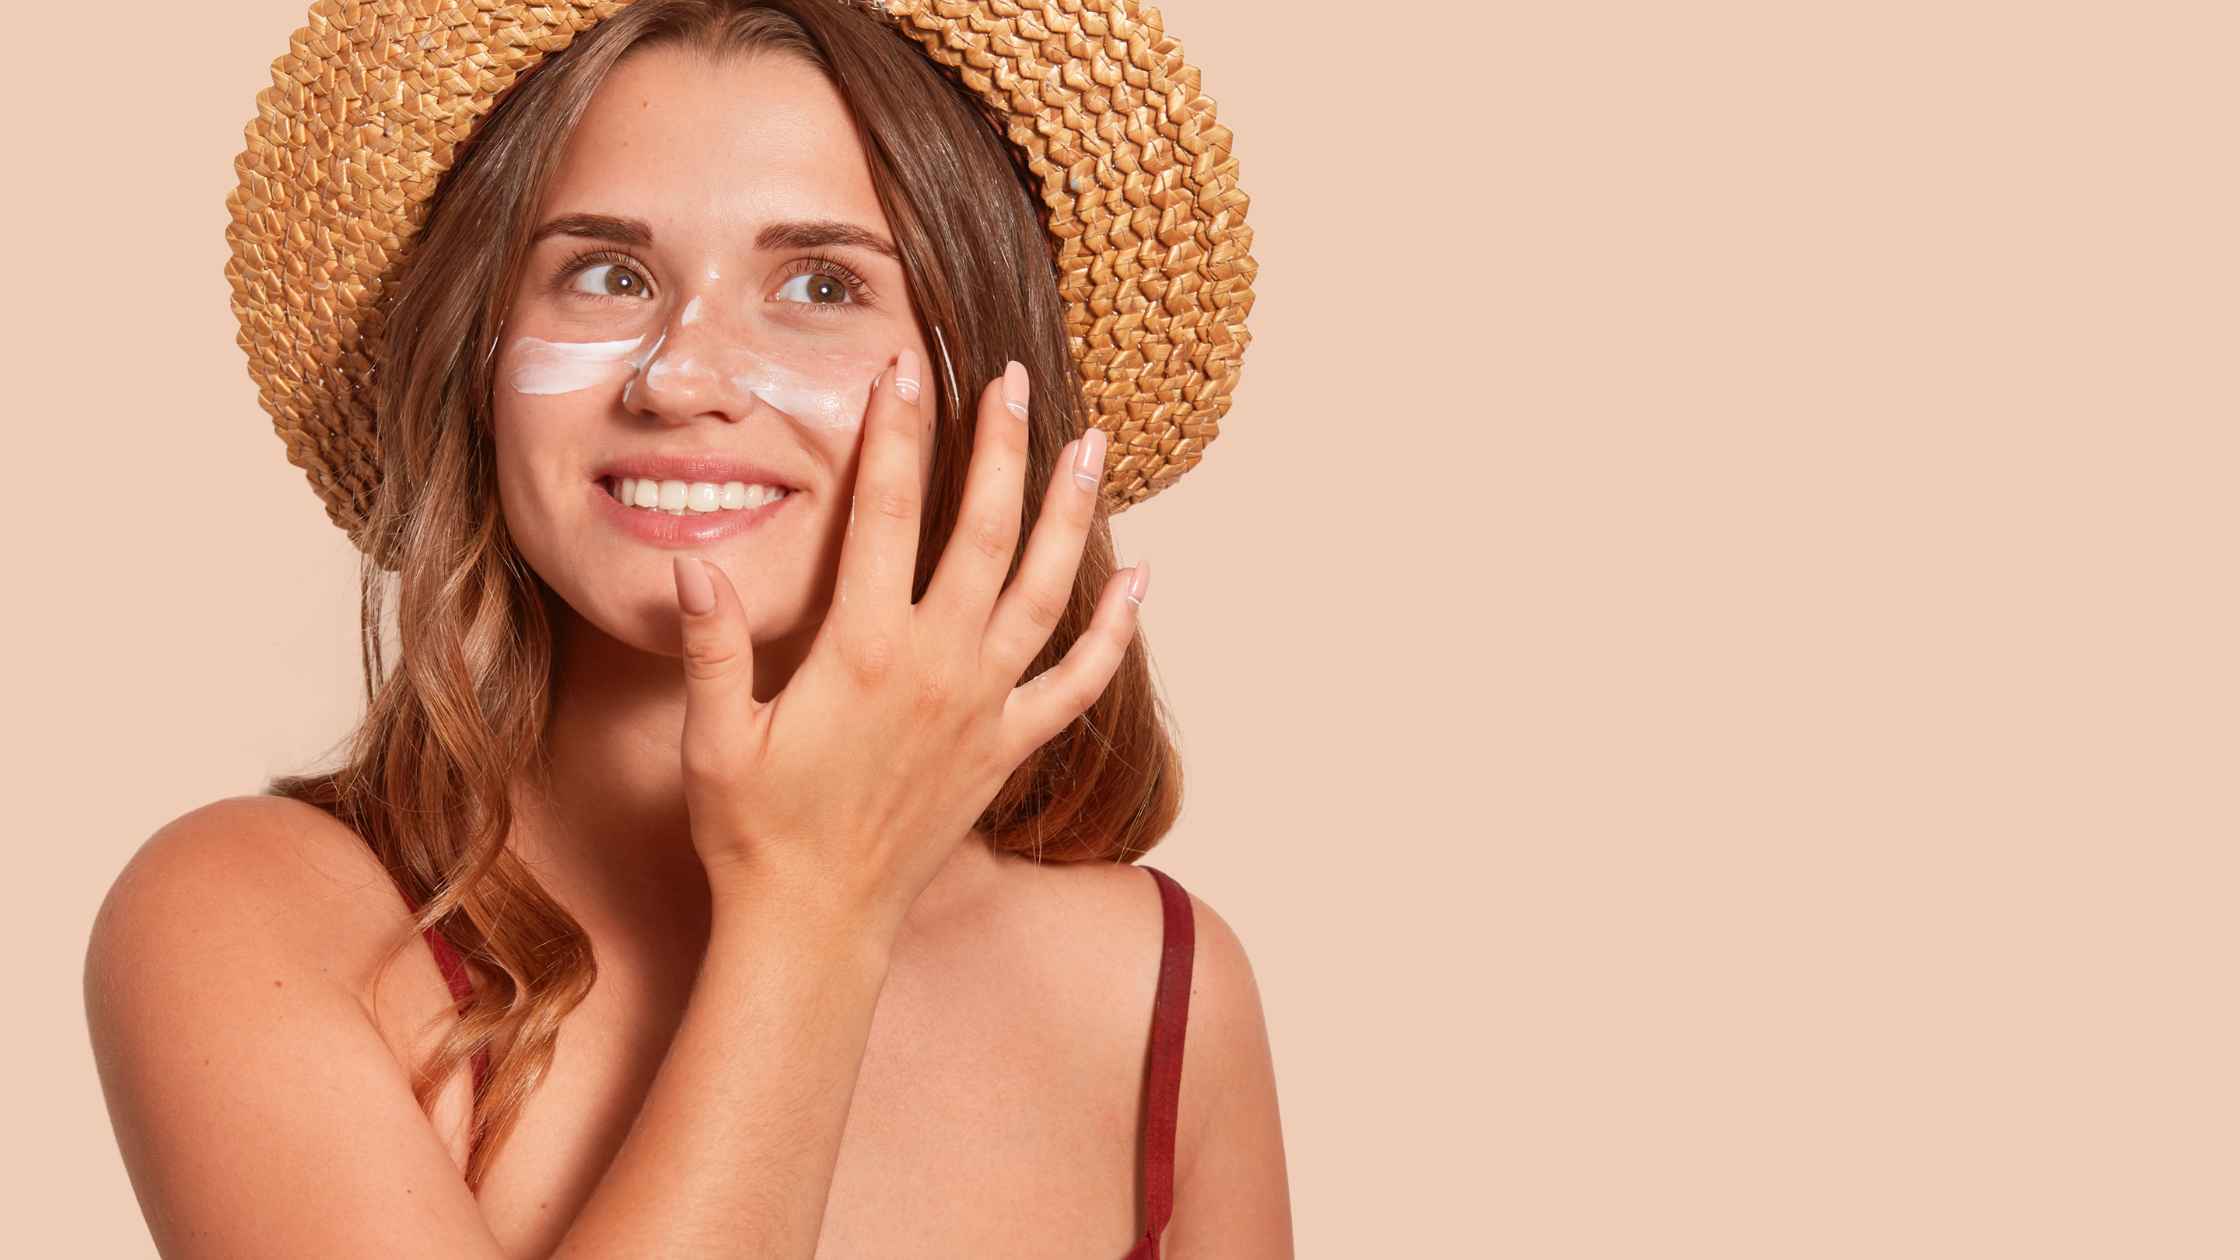 Sunscreen 101: Choosing the Right Protection for Your Skin